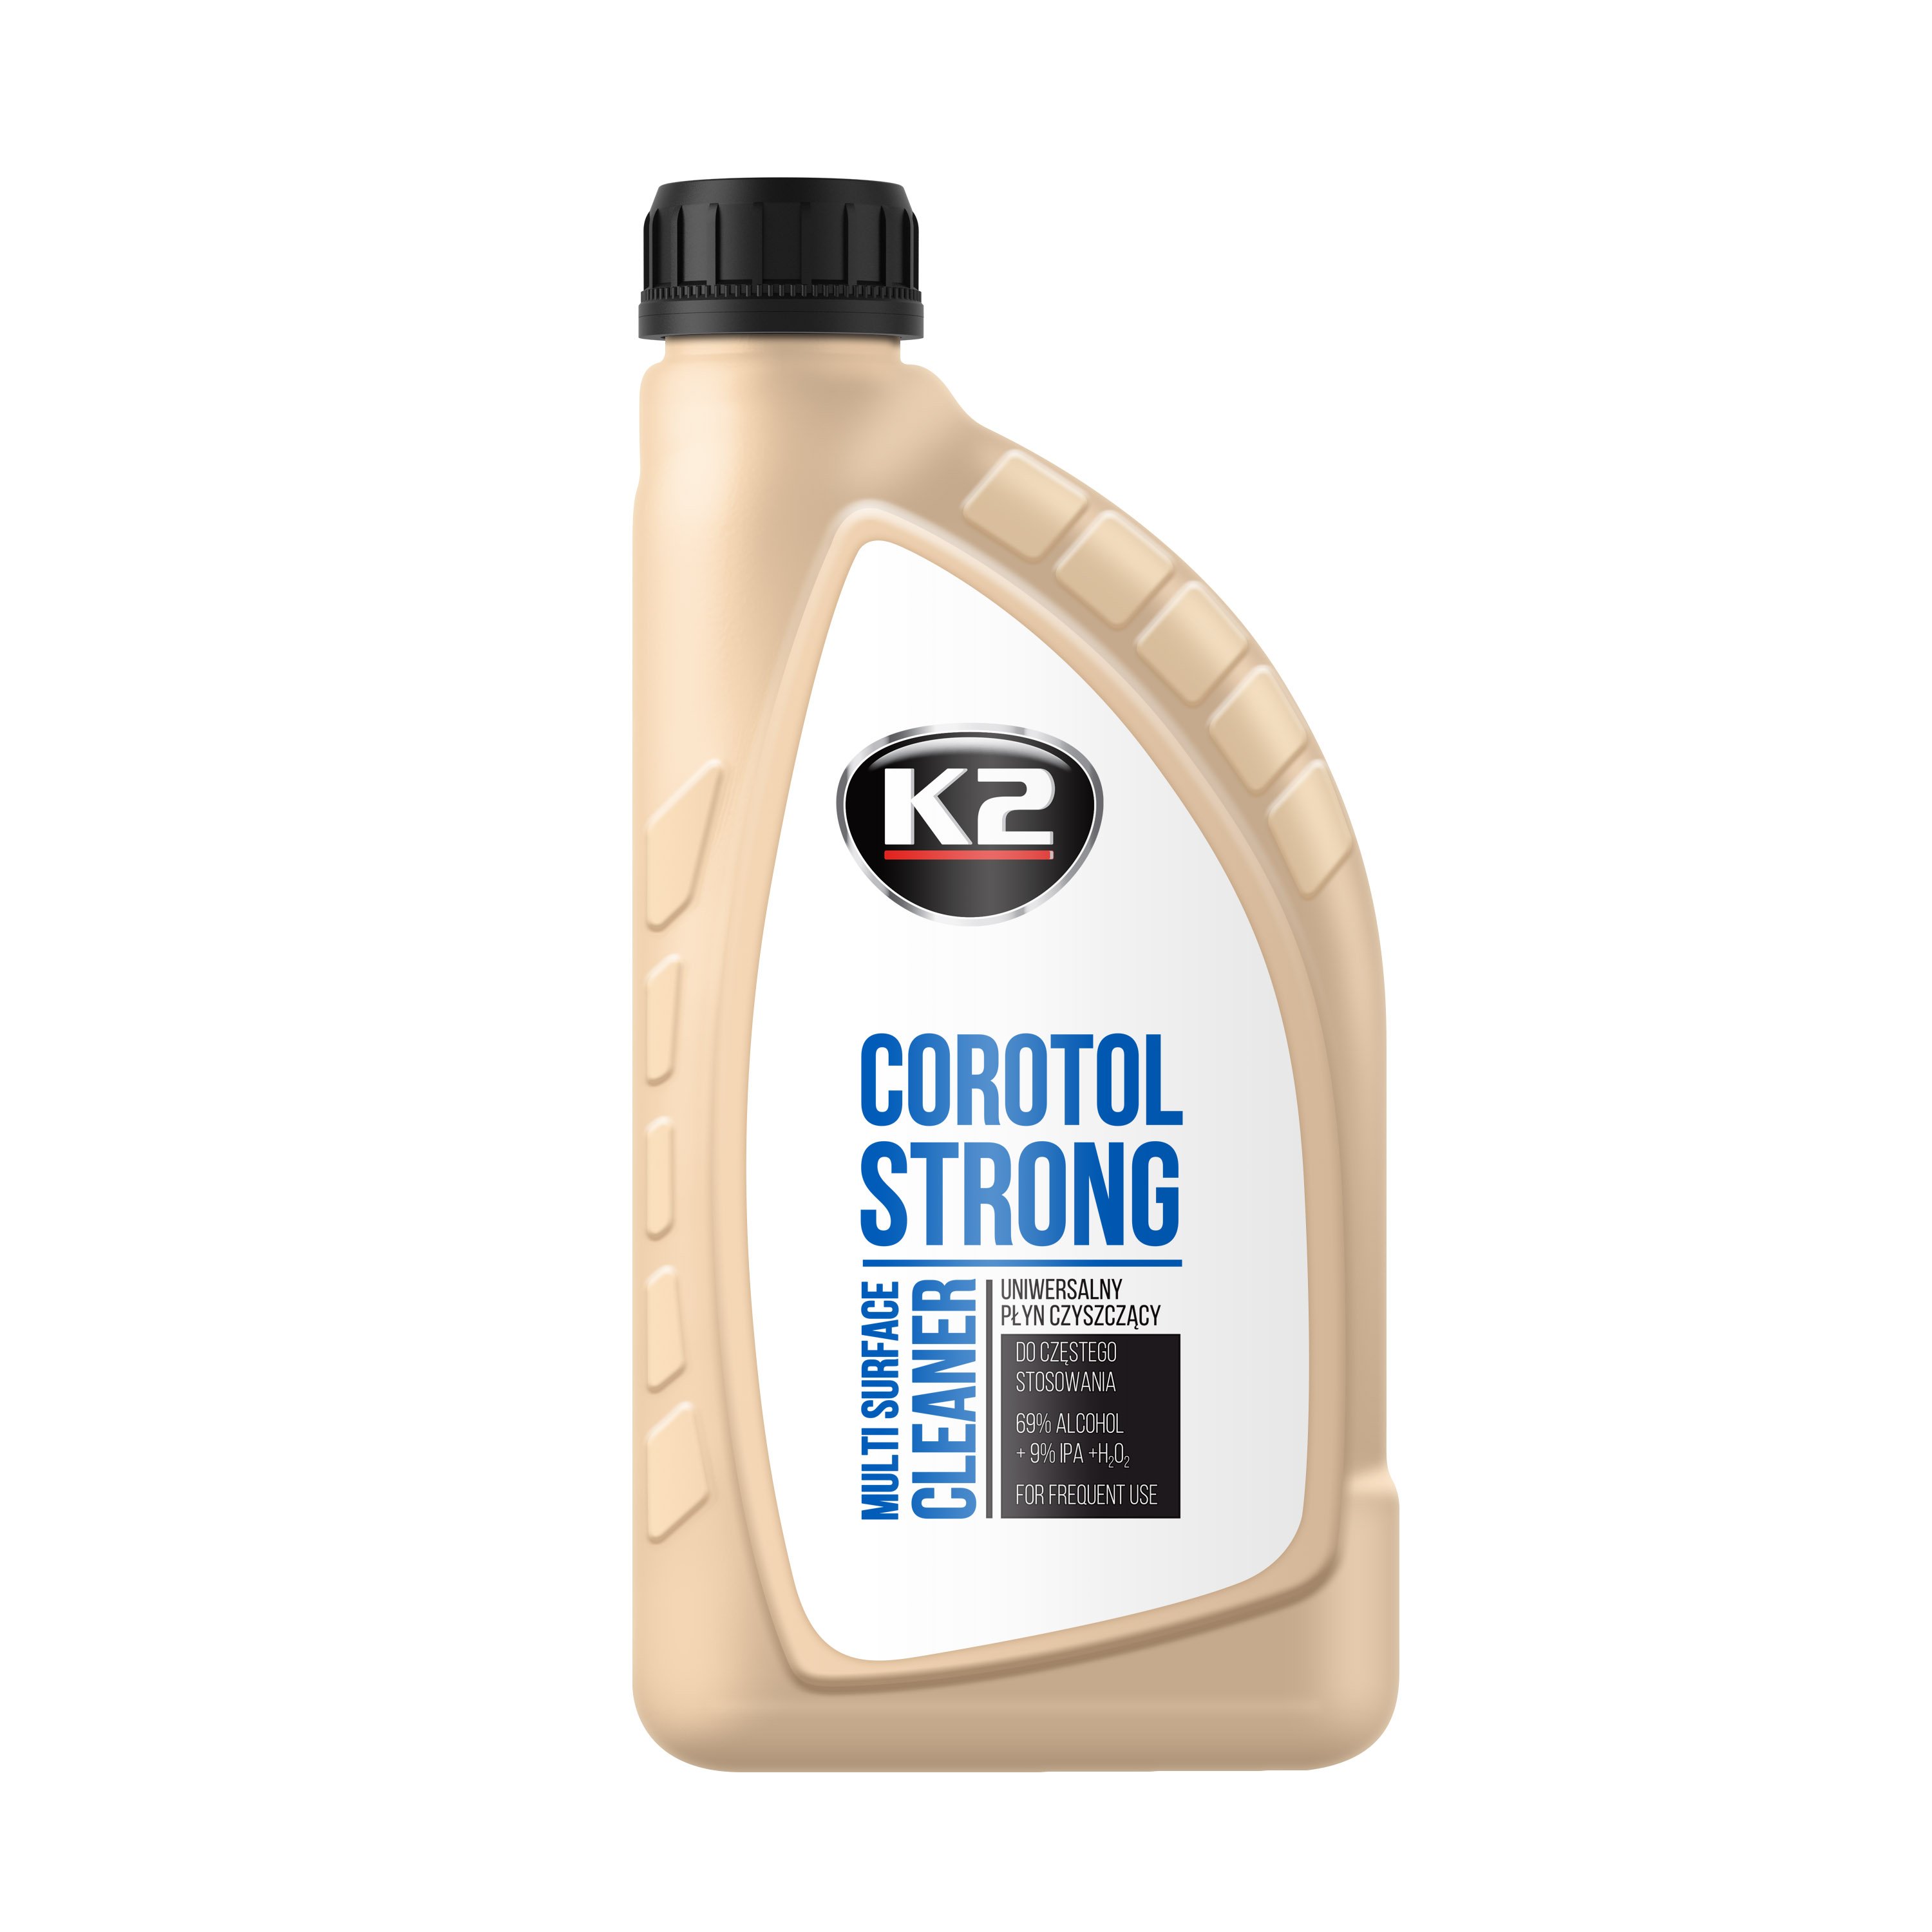 Cleaning and detergents Disinfectant alcohol-free COROTOL STRONG 1L REFILL  Art. K2H083R